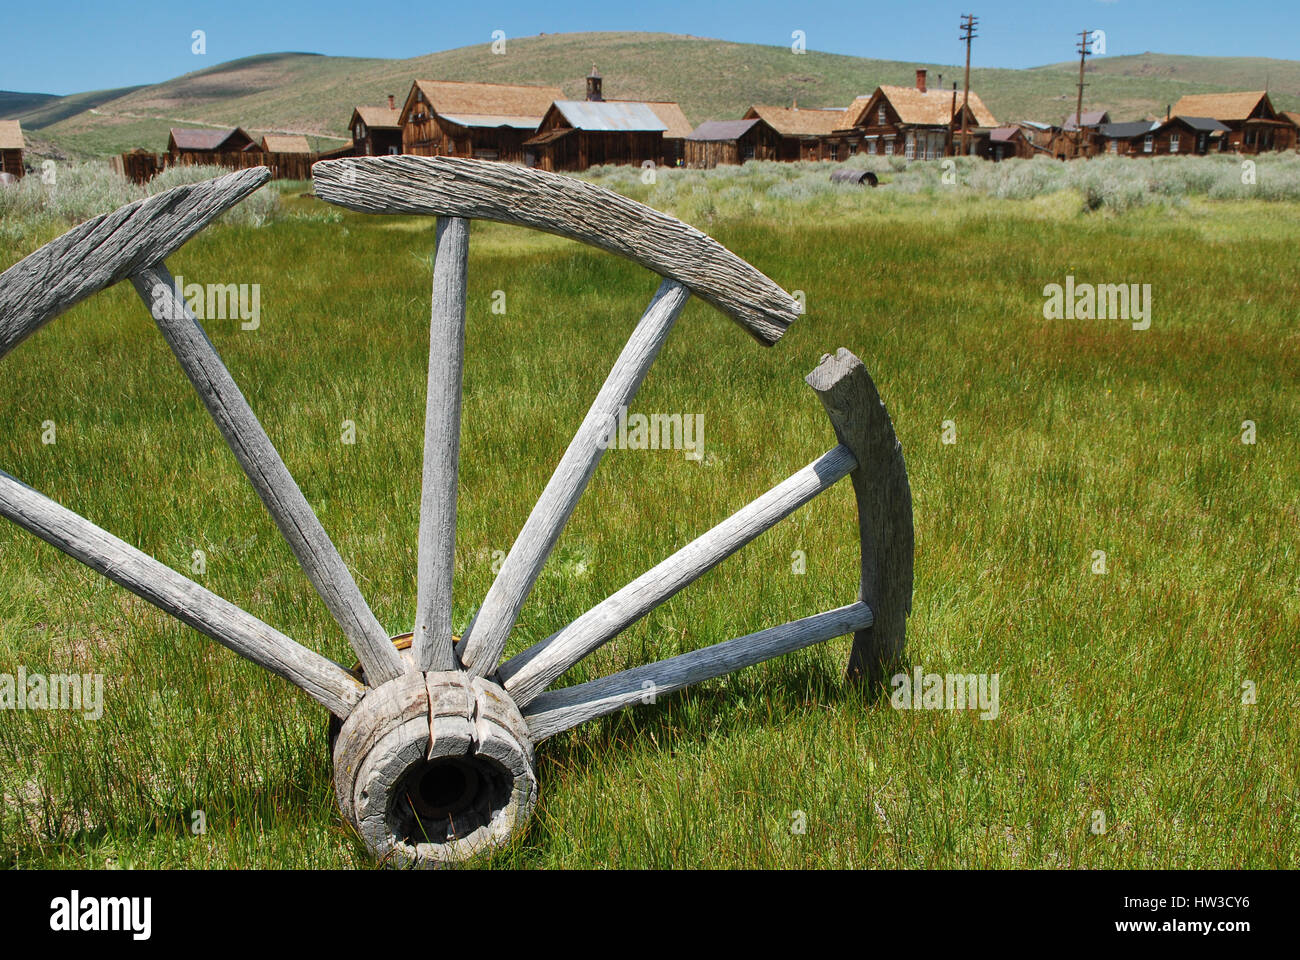 A wooden wagon wheel stuck in the ground in the foreground and beyond is a row of several old buildings of Bodie, a ghost town in California. Stock Photo